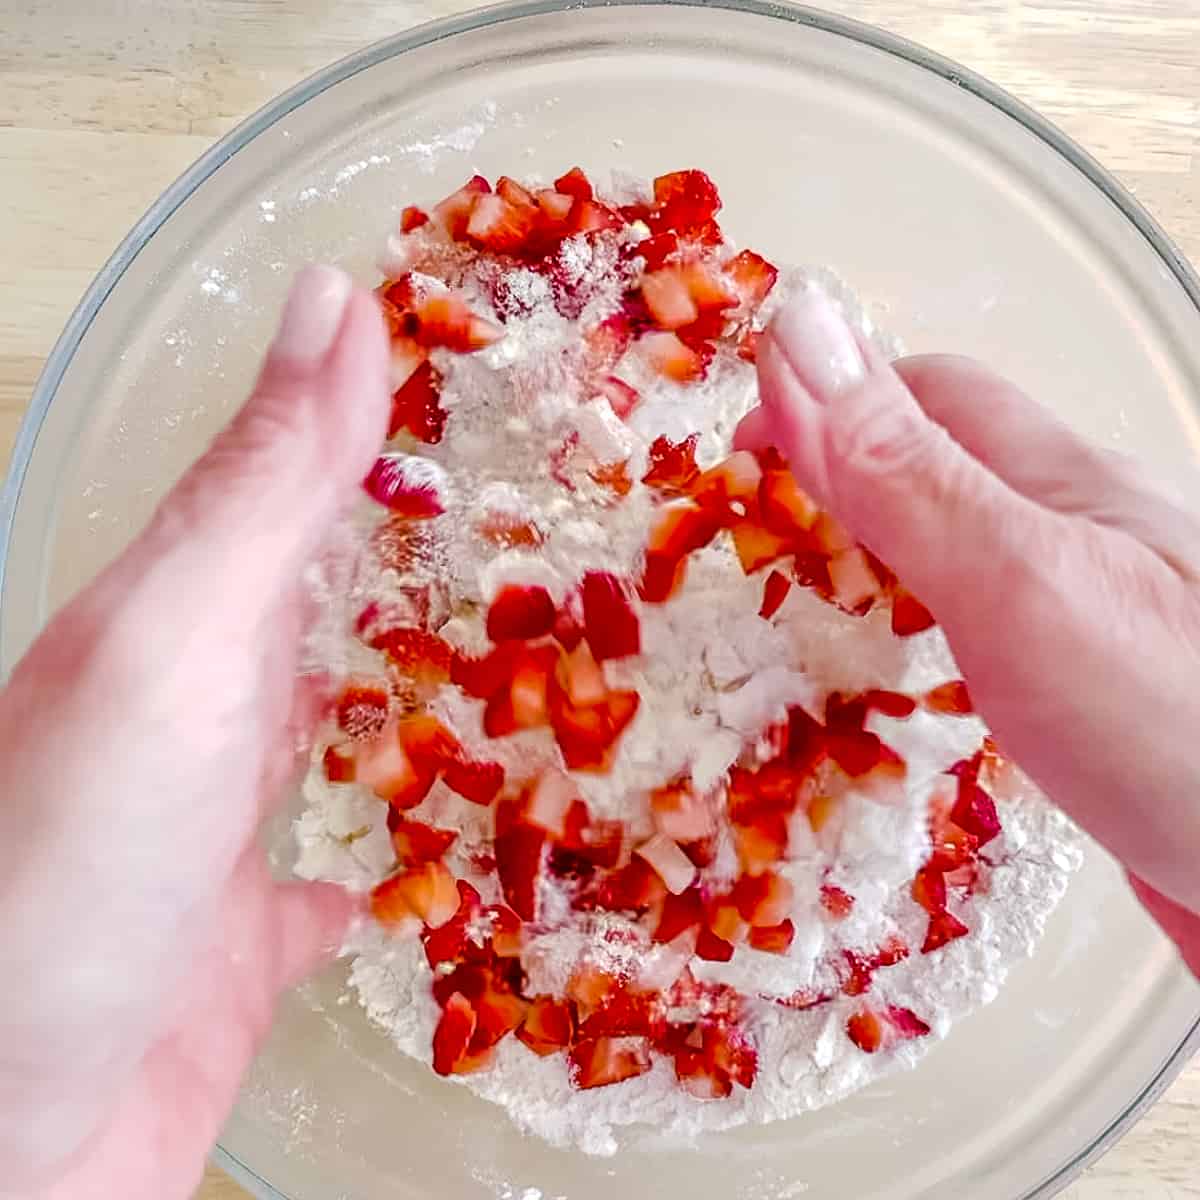 tossing diced strawberries with biscuit dough ingredients.